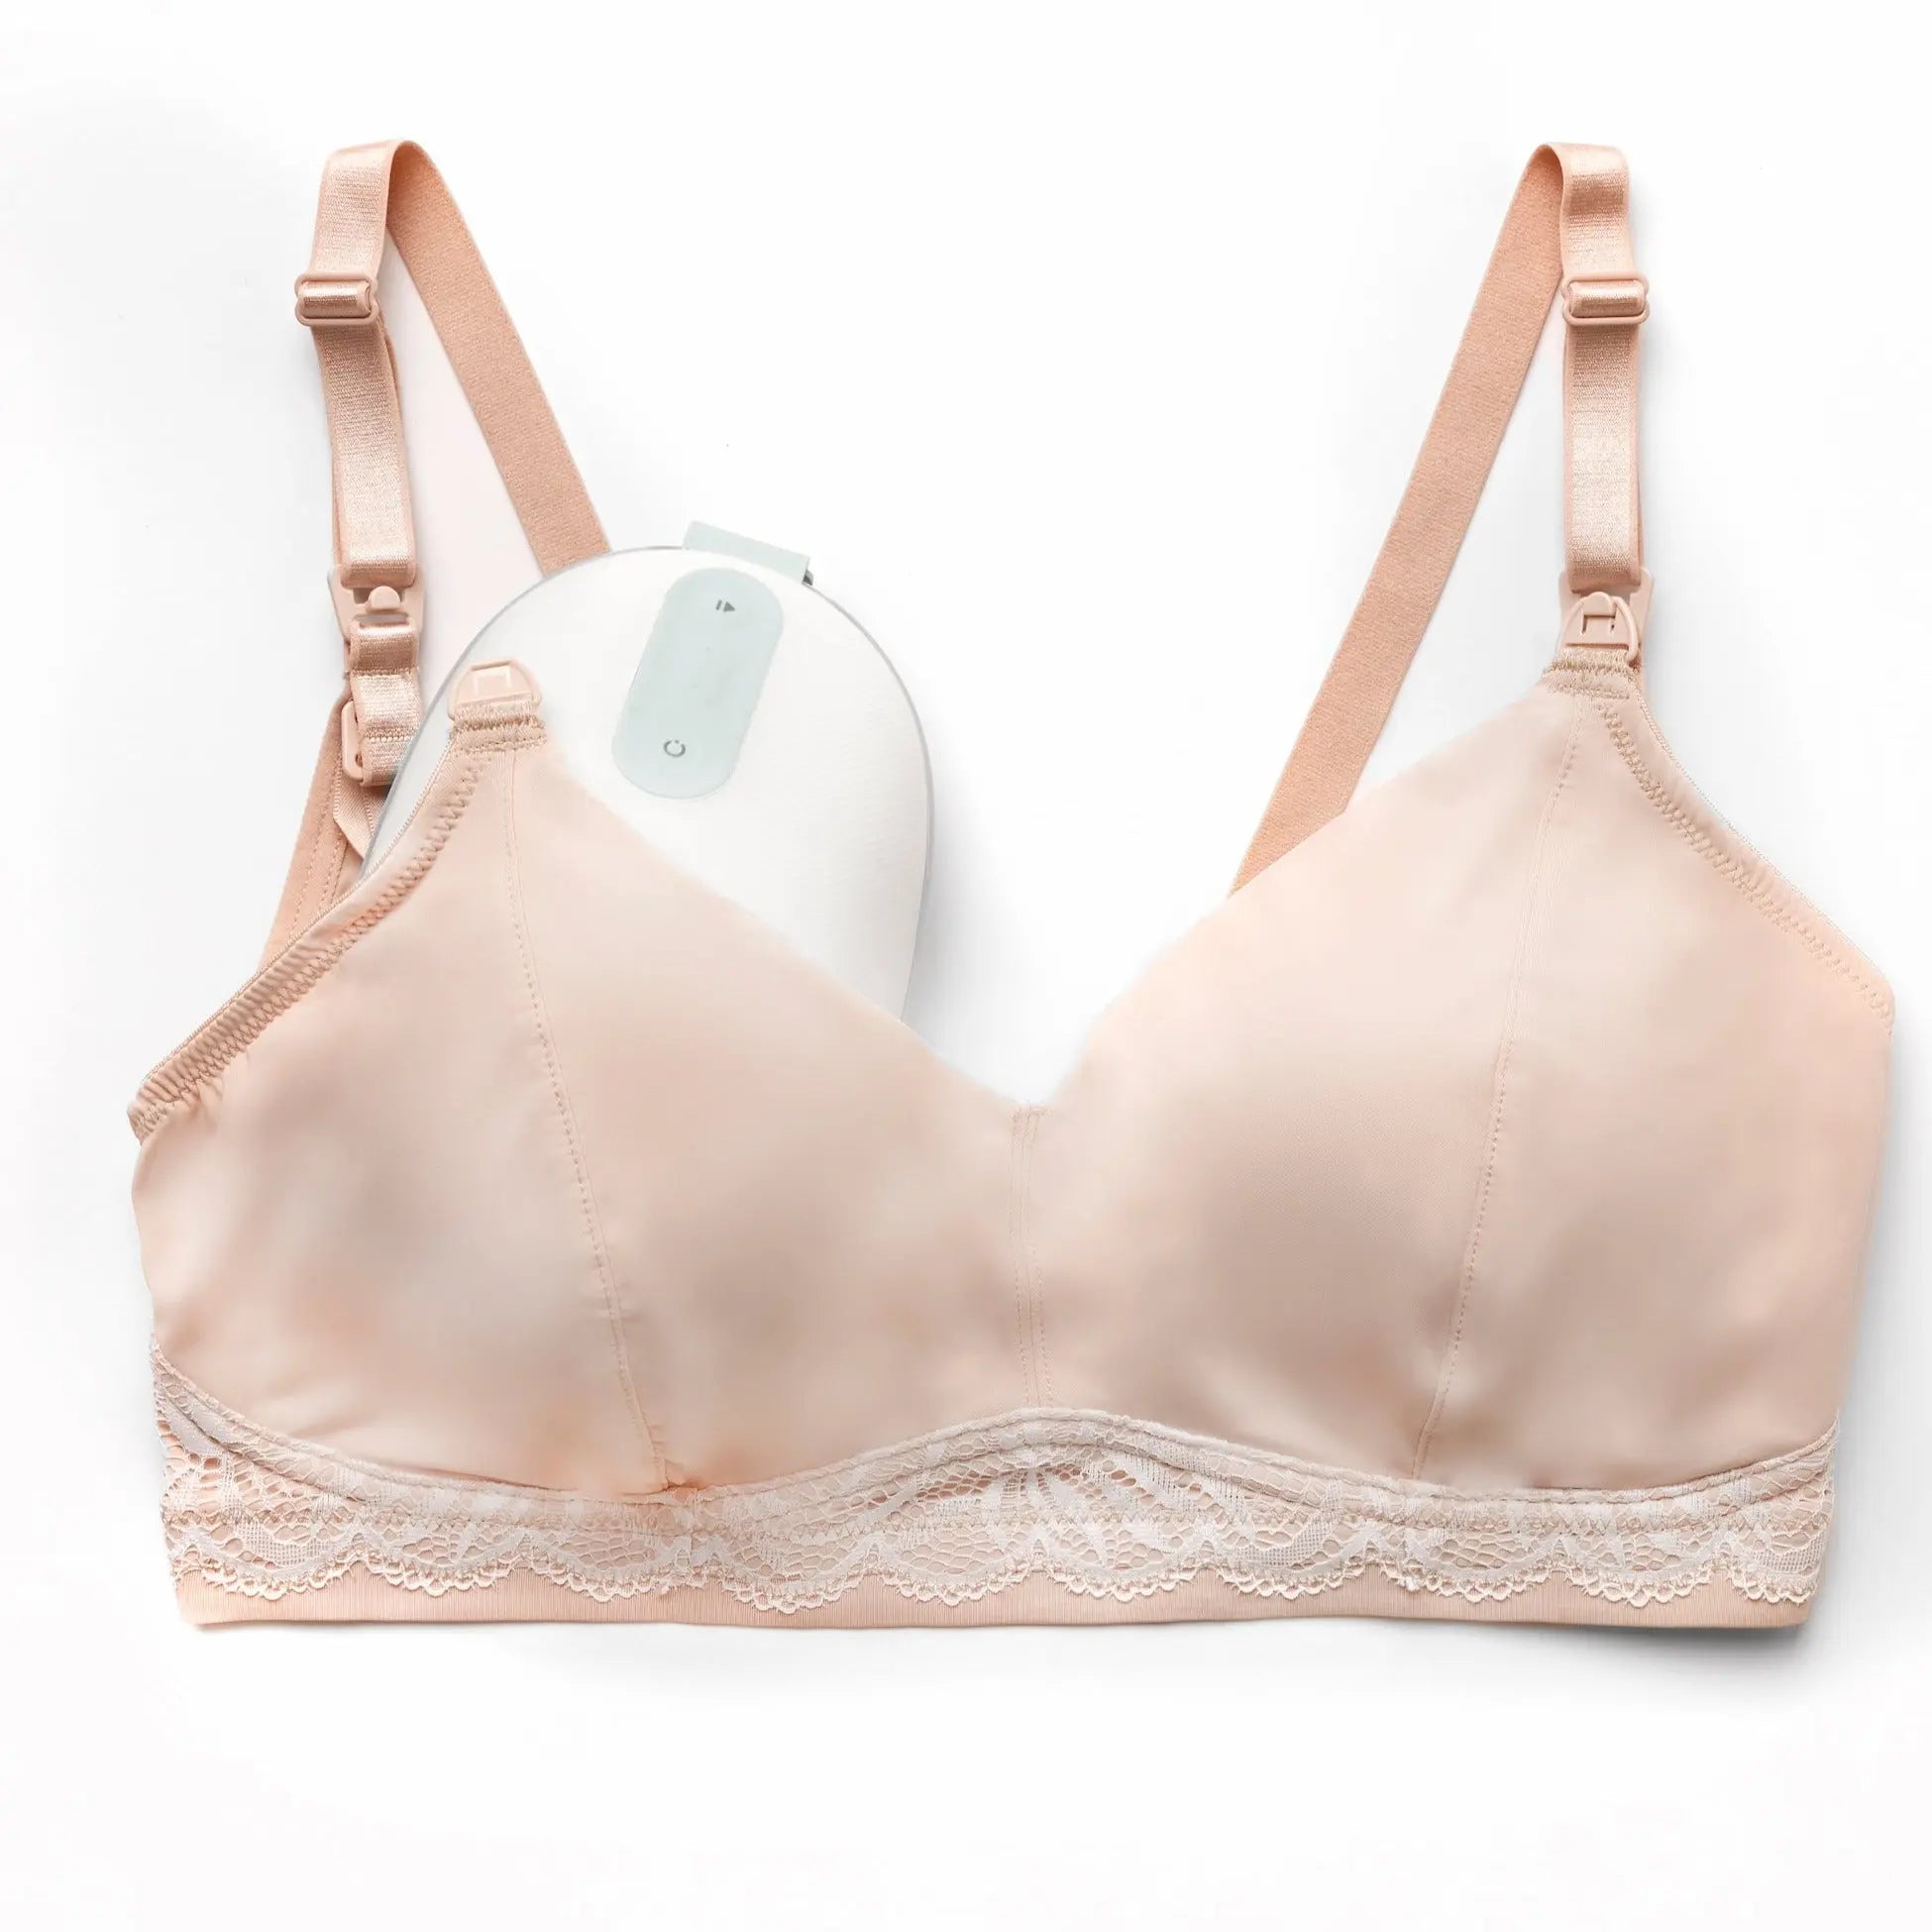 Shop Bras at Young Hearts Lingerie